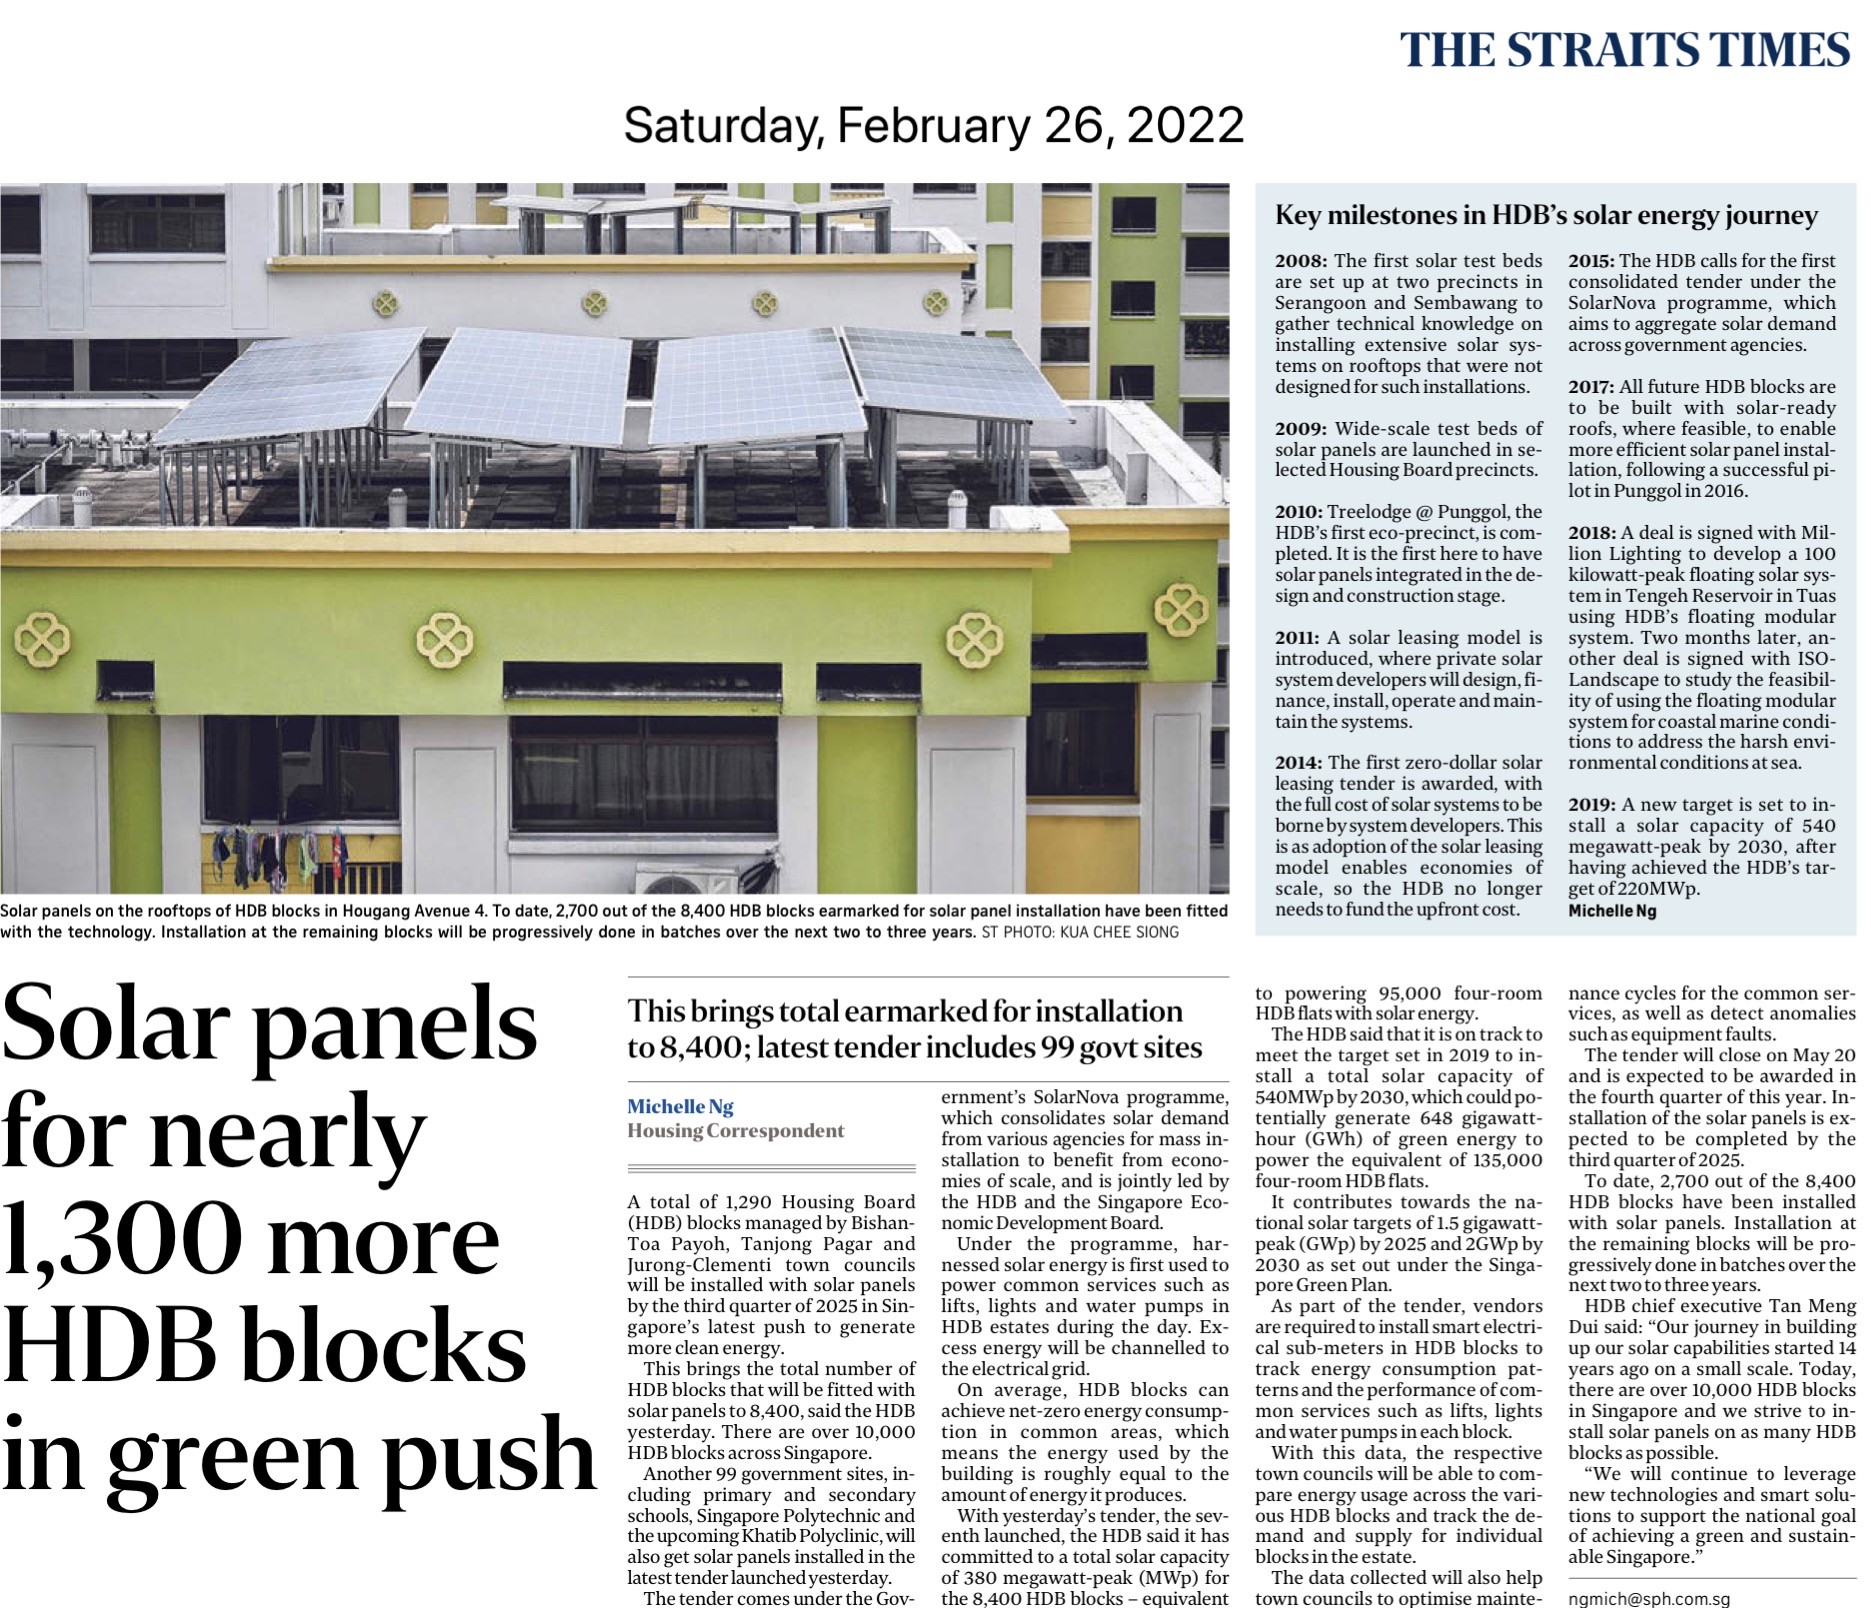 Solar panels for nearly 1,300 more HDB blocks in green push - The Straits Times, 26 February 2022